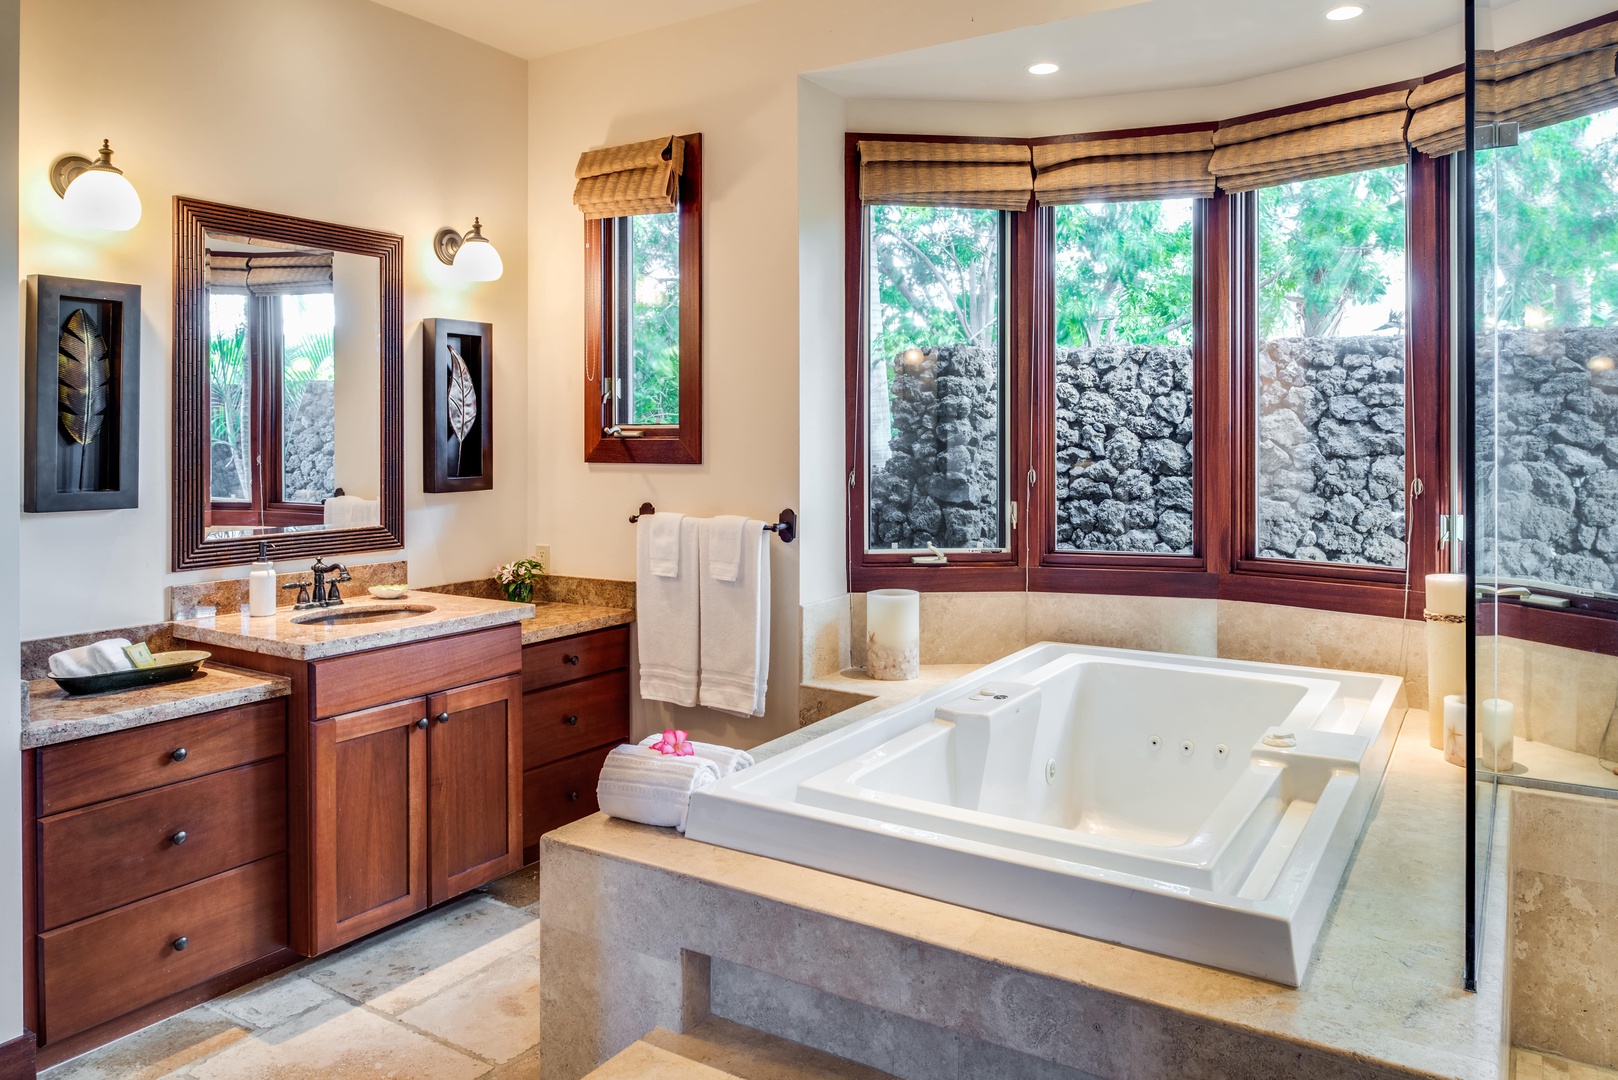 Kamuela Vacation Rentals, House of the Turtle at Champion Ridge, Mauna Lani (CR 18) - Primary Bath w/ Luxurious Jetted Tub & Dual Vanity Sinks